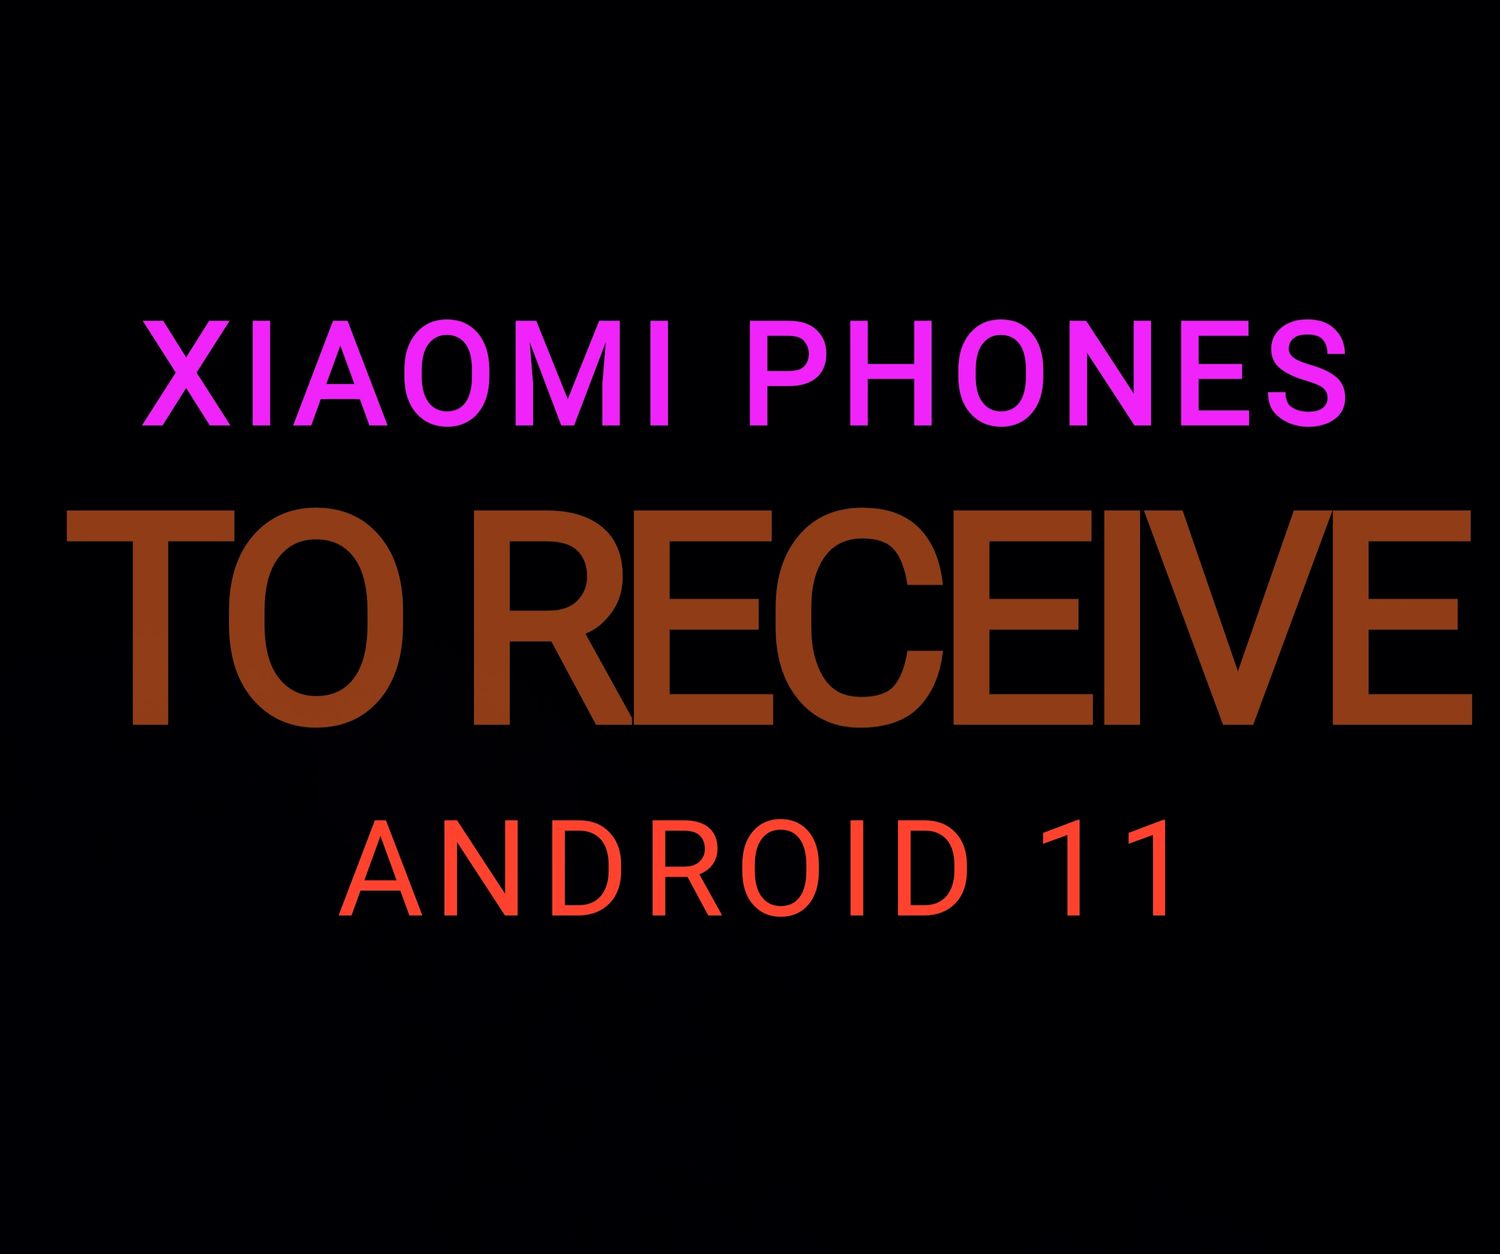 List of Xiaomi phones to receive Android 11